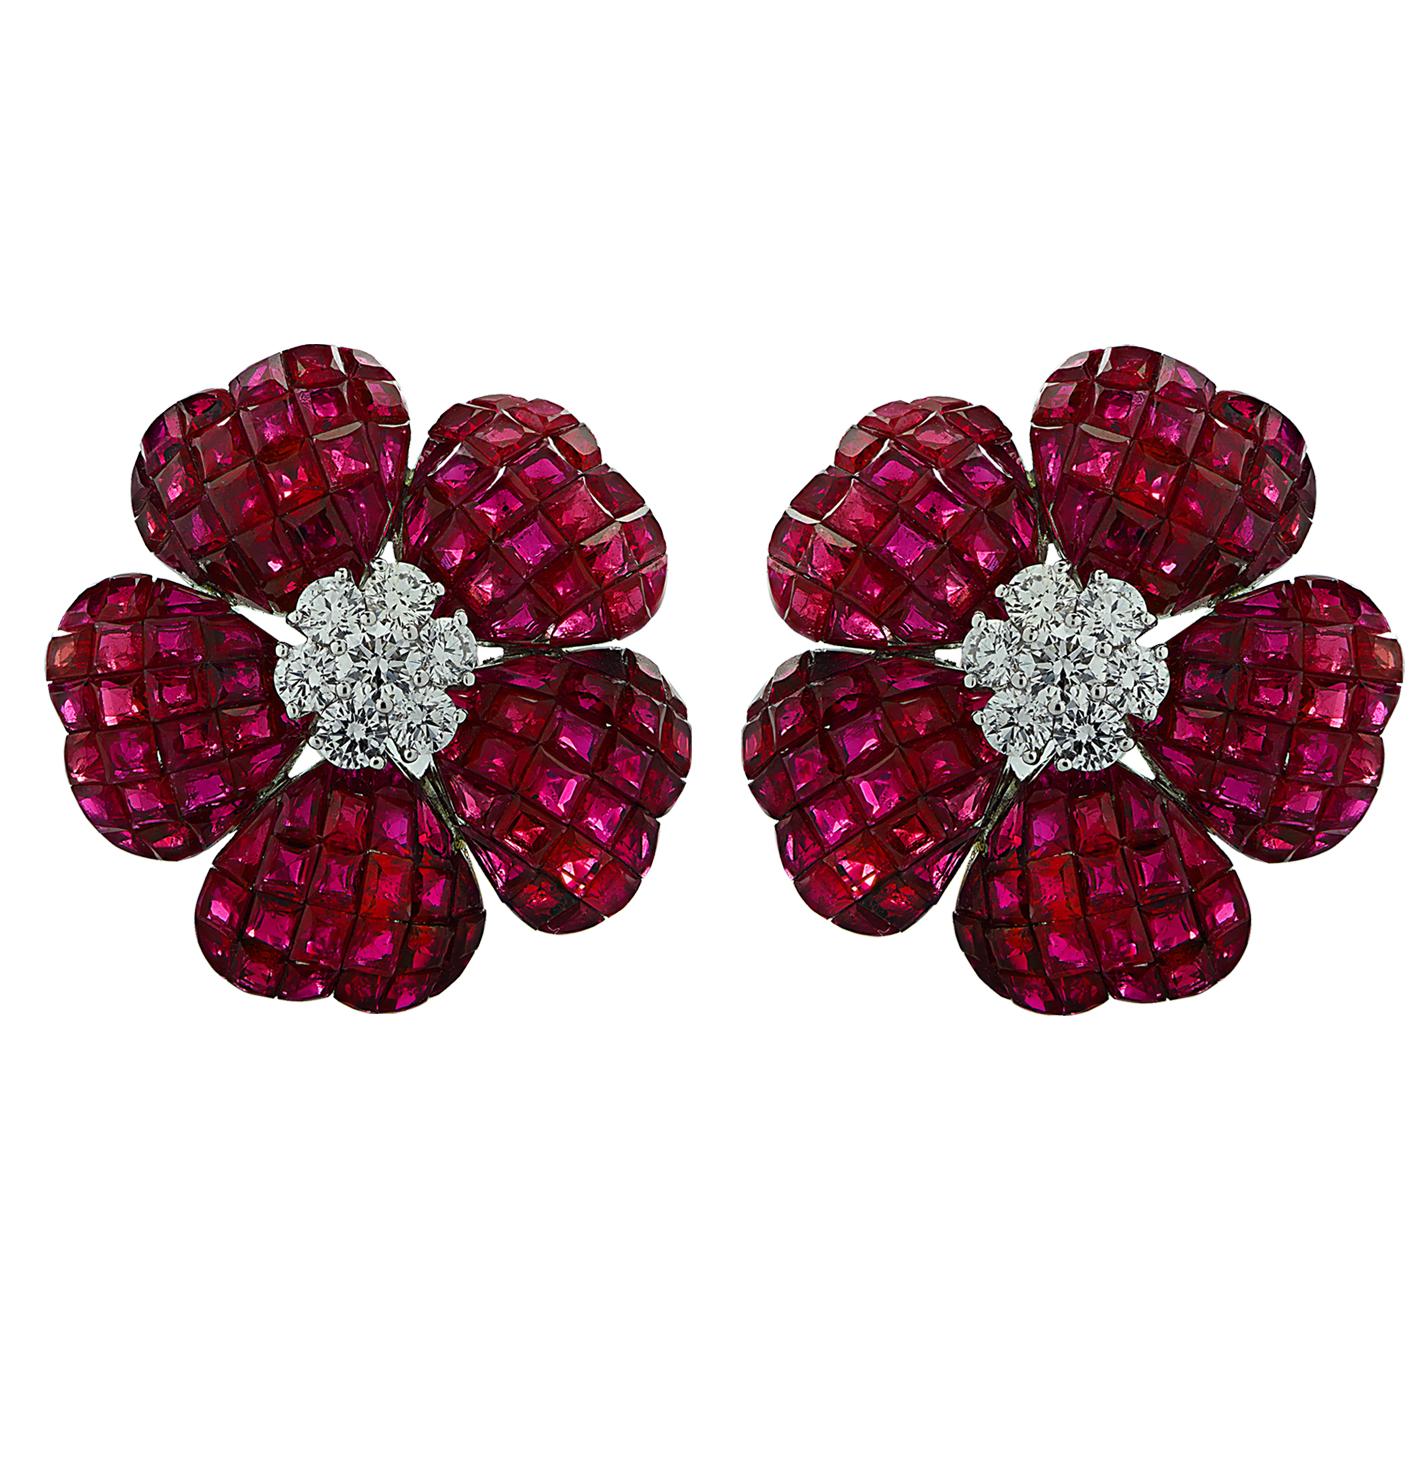 Enchanting Ruby and Diamond Stud Earrings crafted in 18 karat white gold, featuring square cut Rubies weighing approximately 37.85 carats total, and round brilliant cut diamonds weigh approximately 1.10 carats total, G color, VS clarity. Heart shape